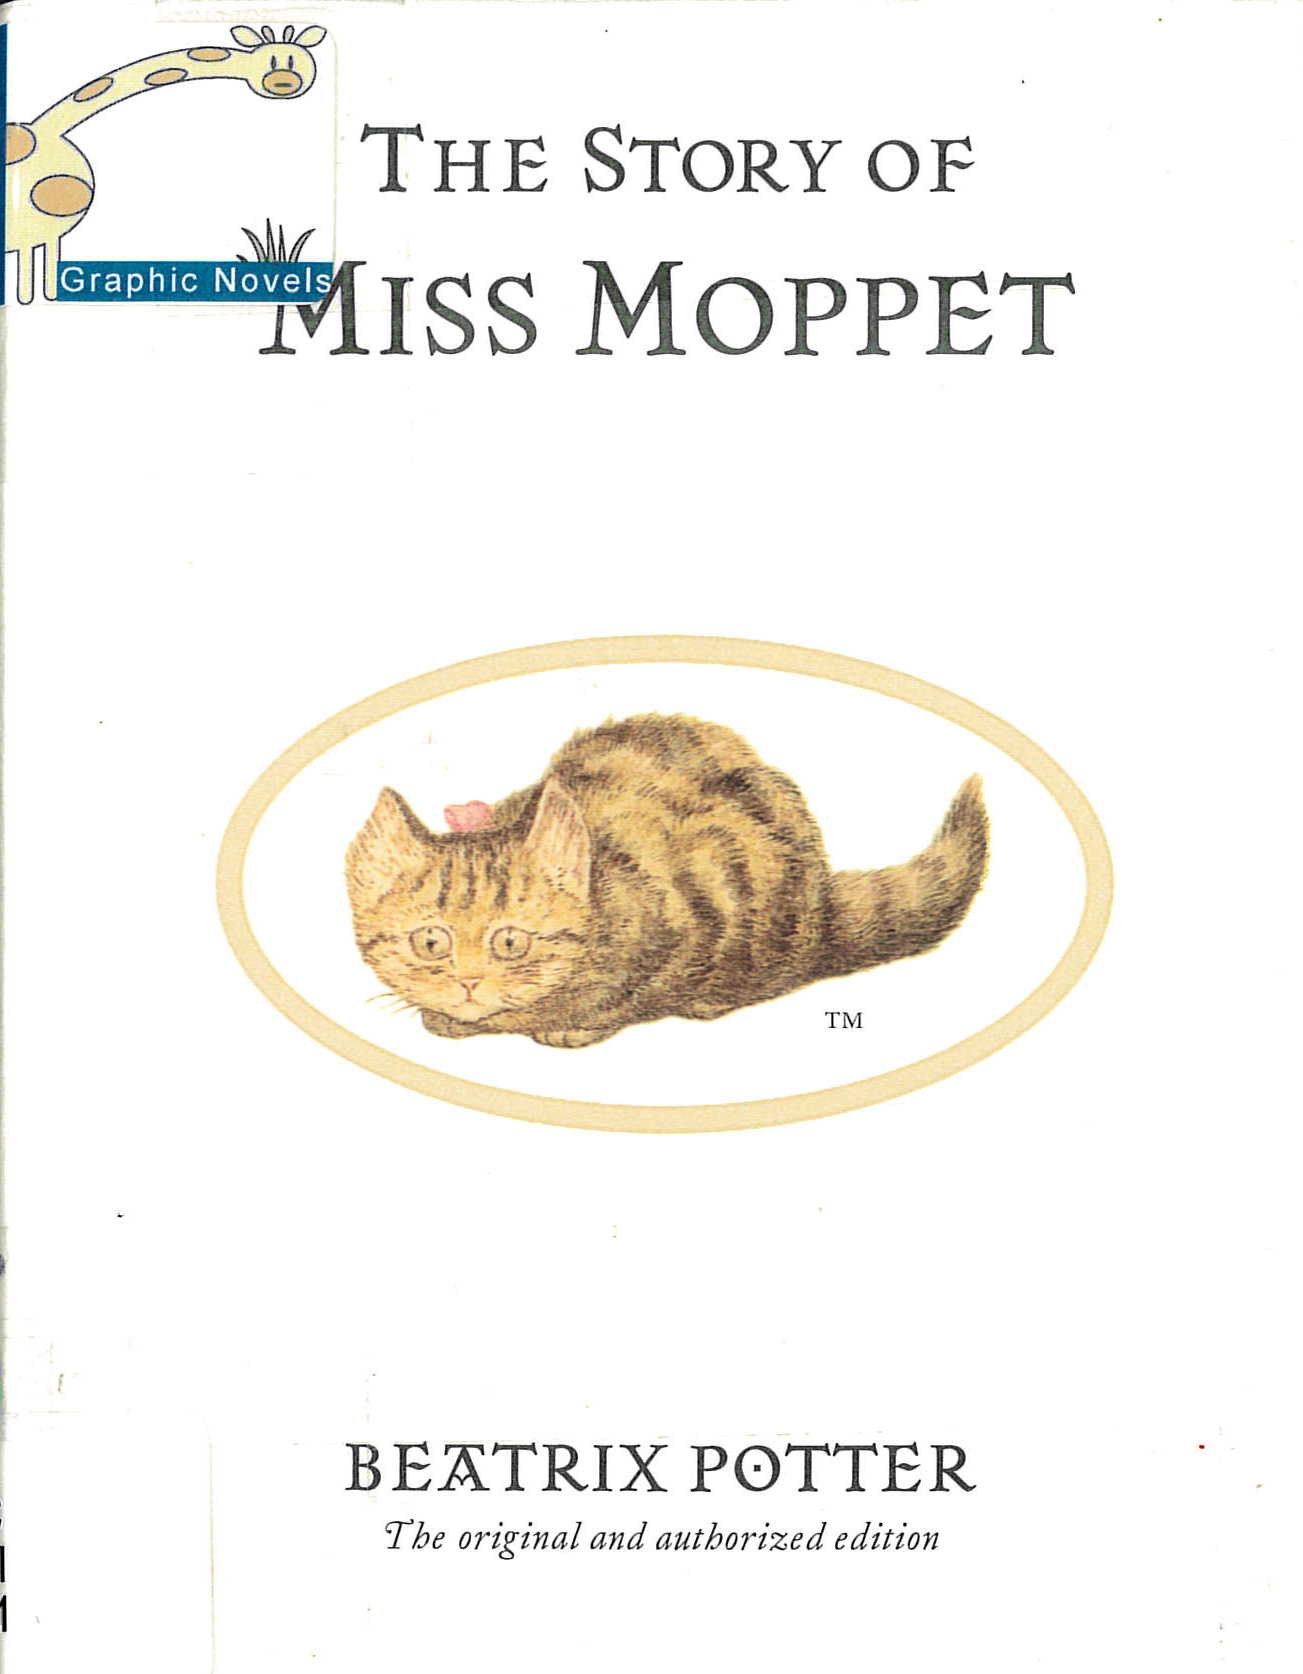 The story of Miss Moppet